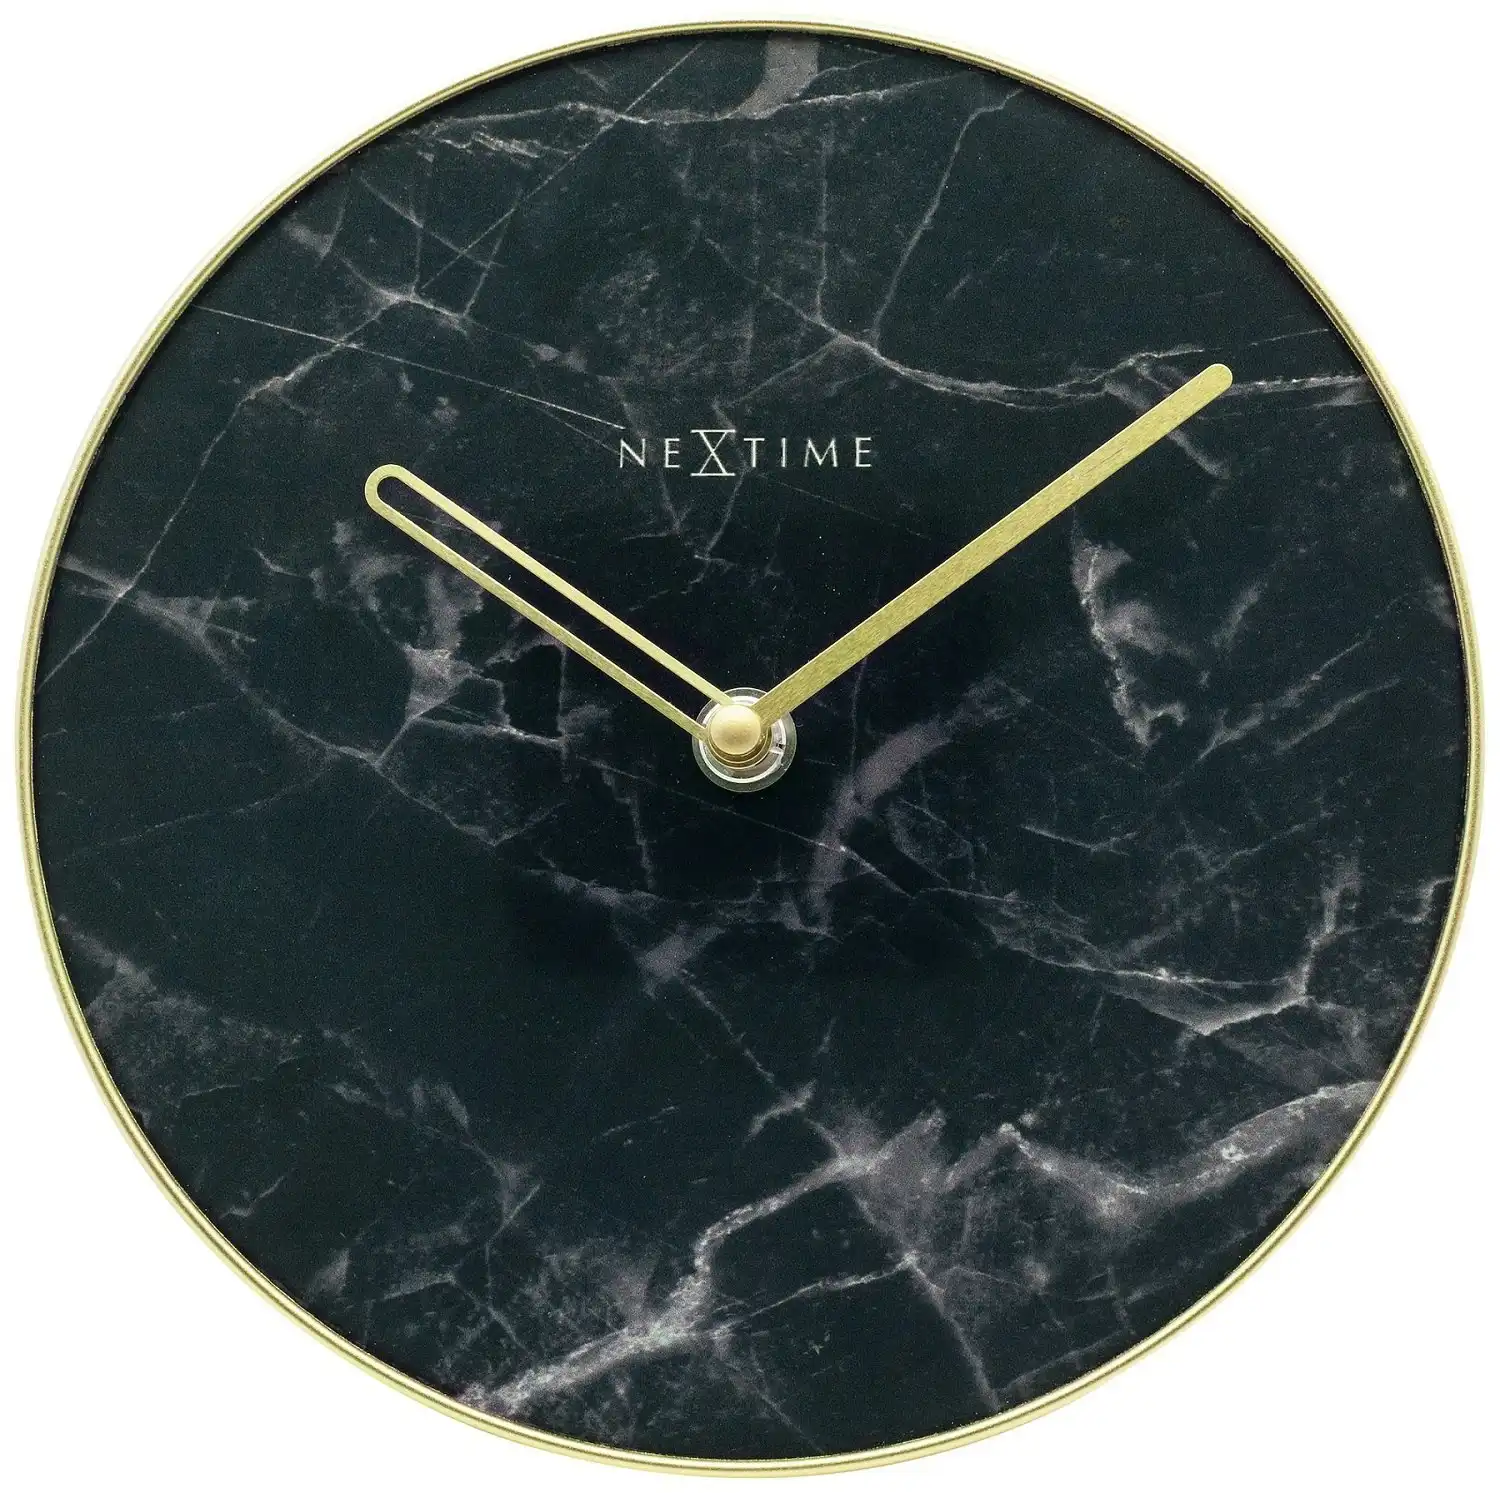 NeXtime 20cm Marble Table/Desk Round Analogue Clock Home/Office Decor Black/Gold